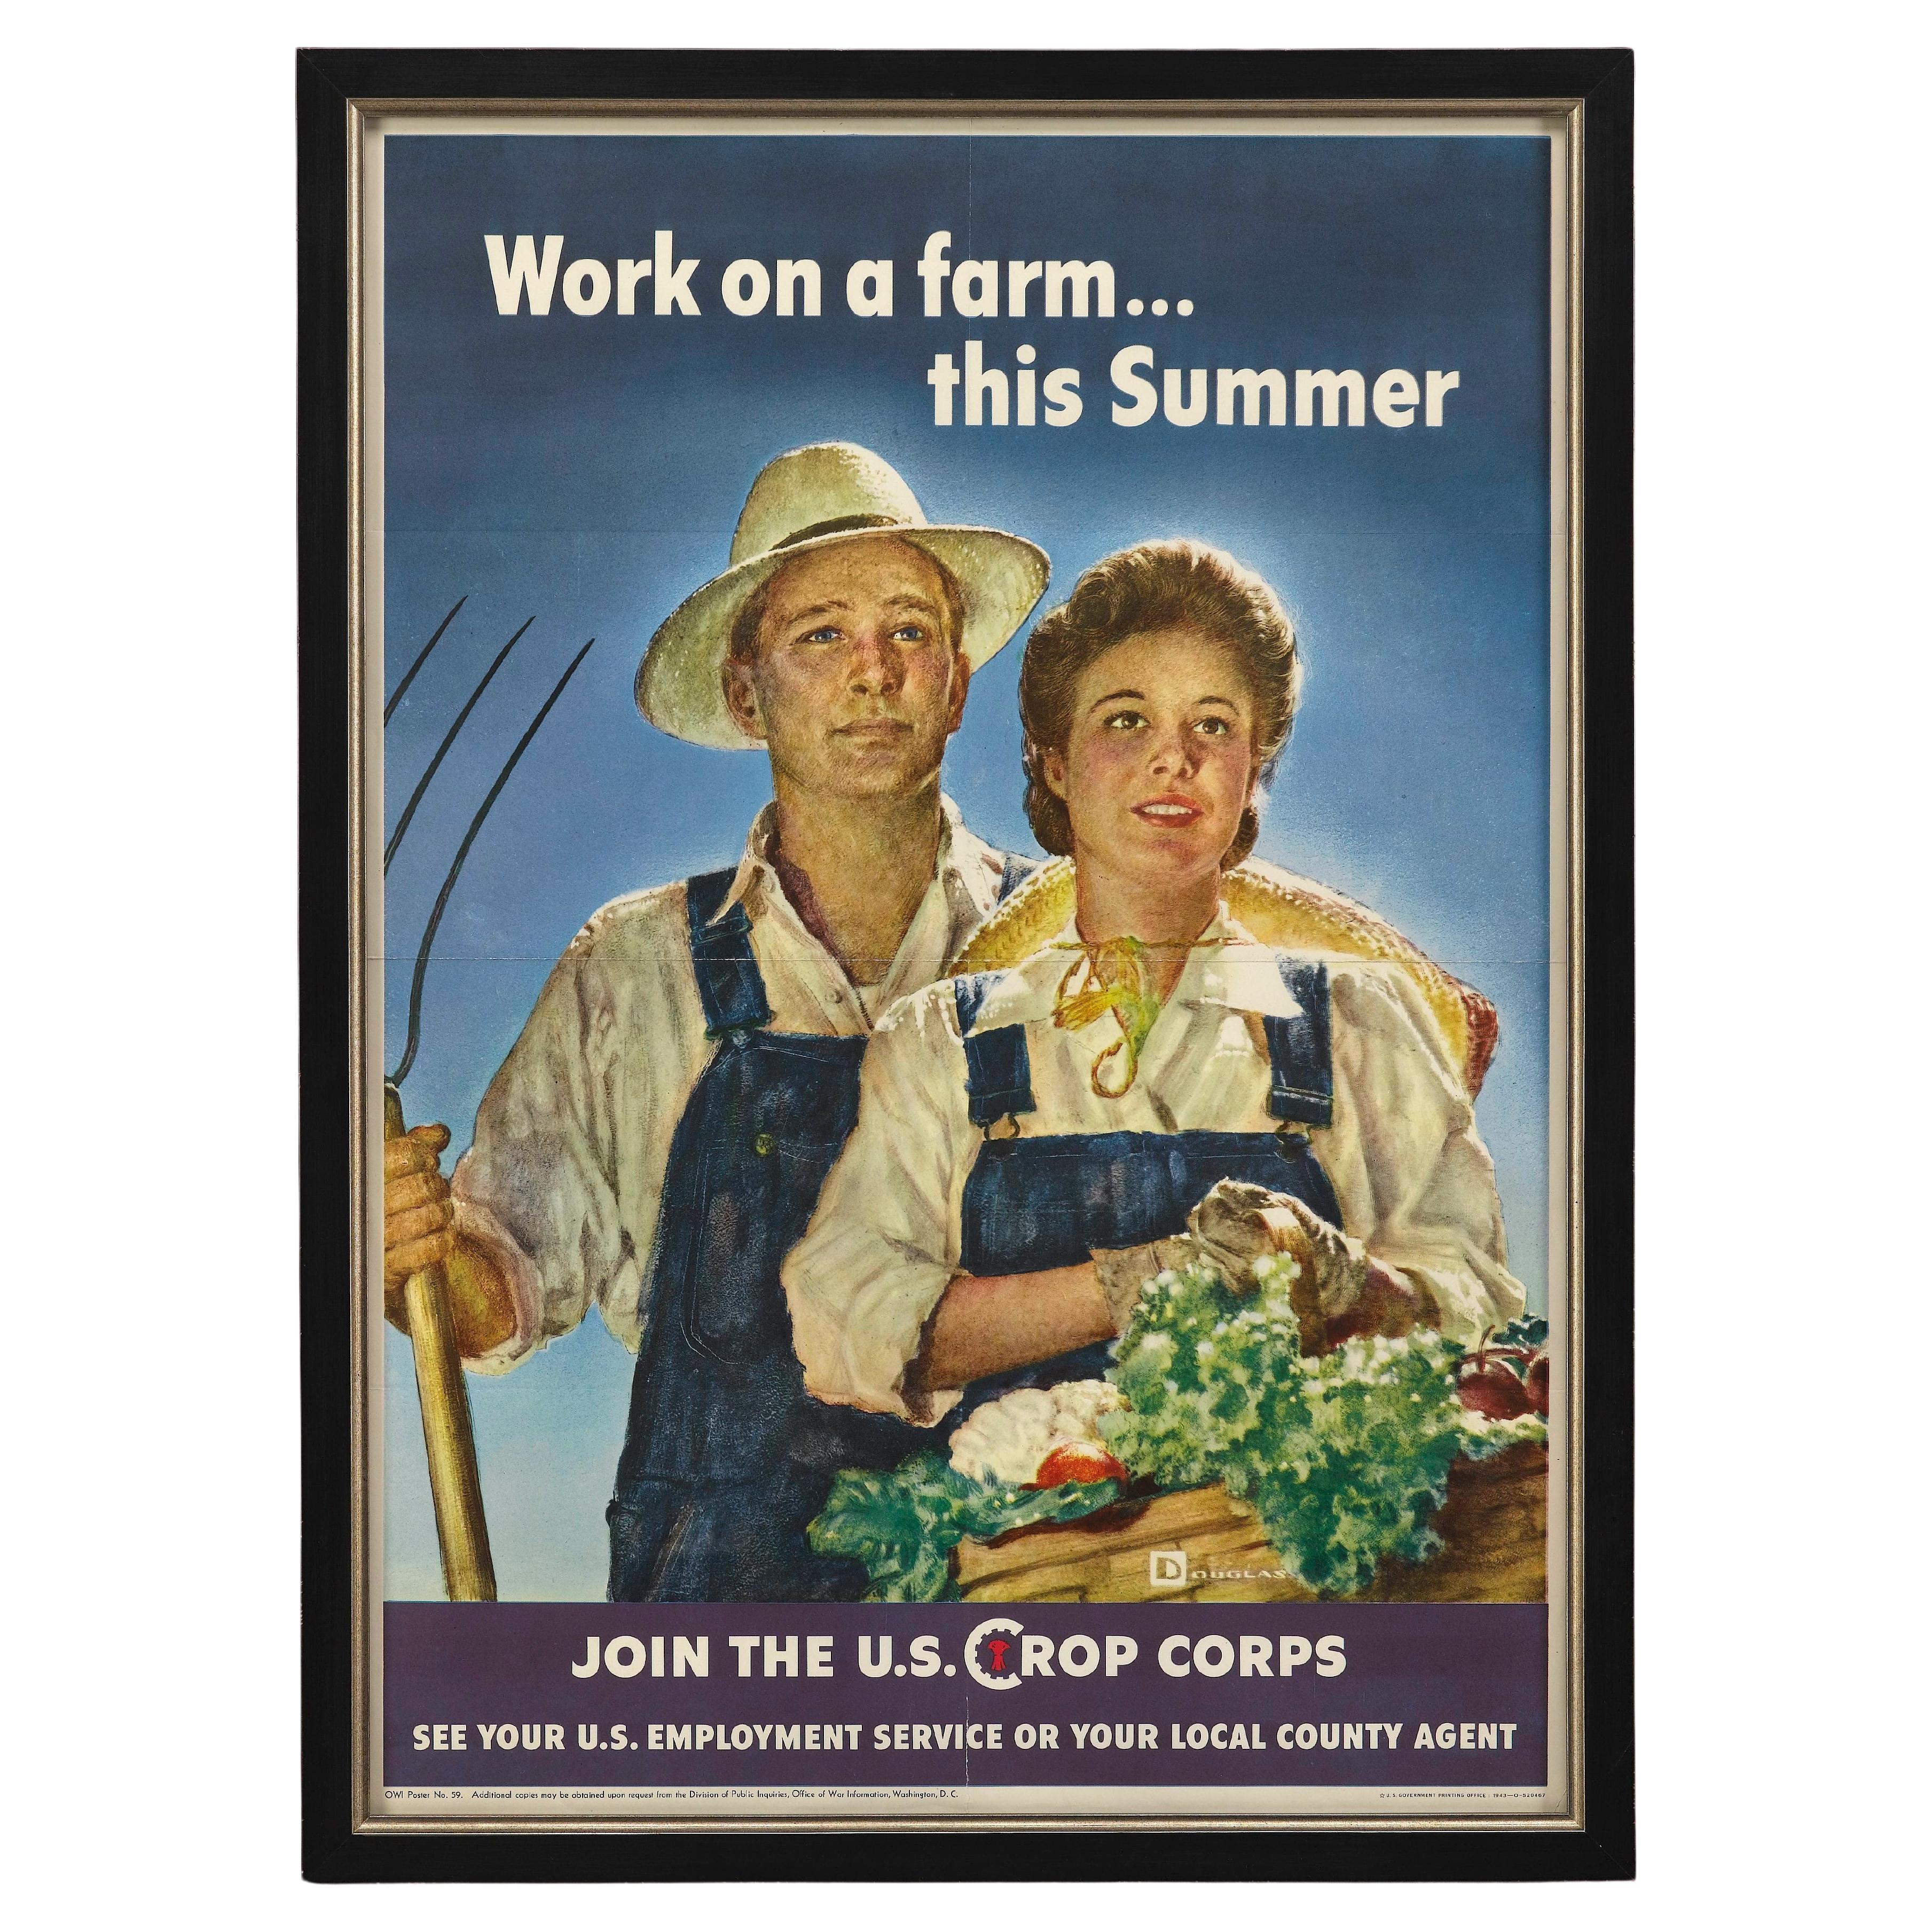 "Work on a farm... this Summer. Join the U.S. Crop Corps" Vintage WWII Poster